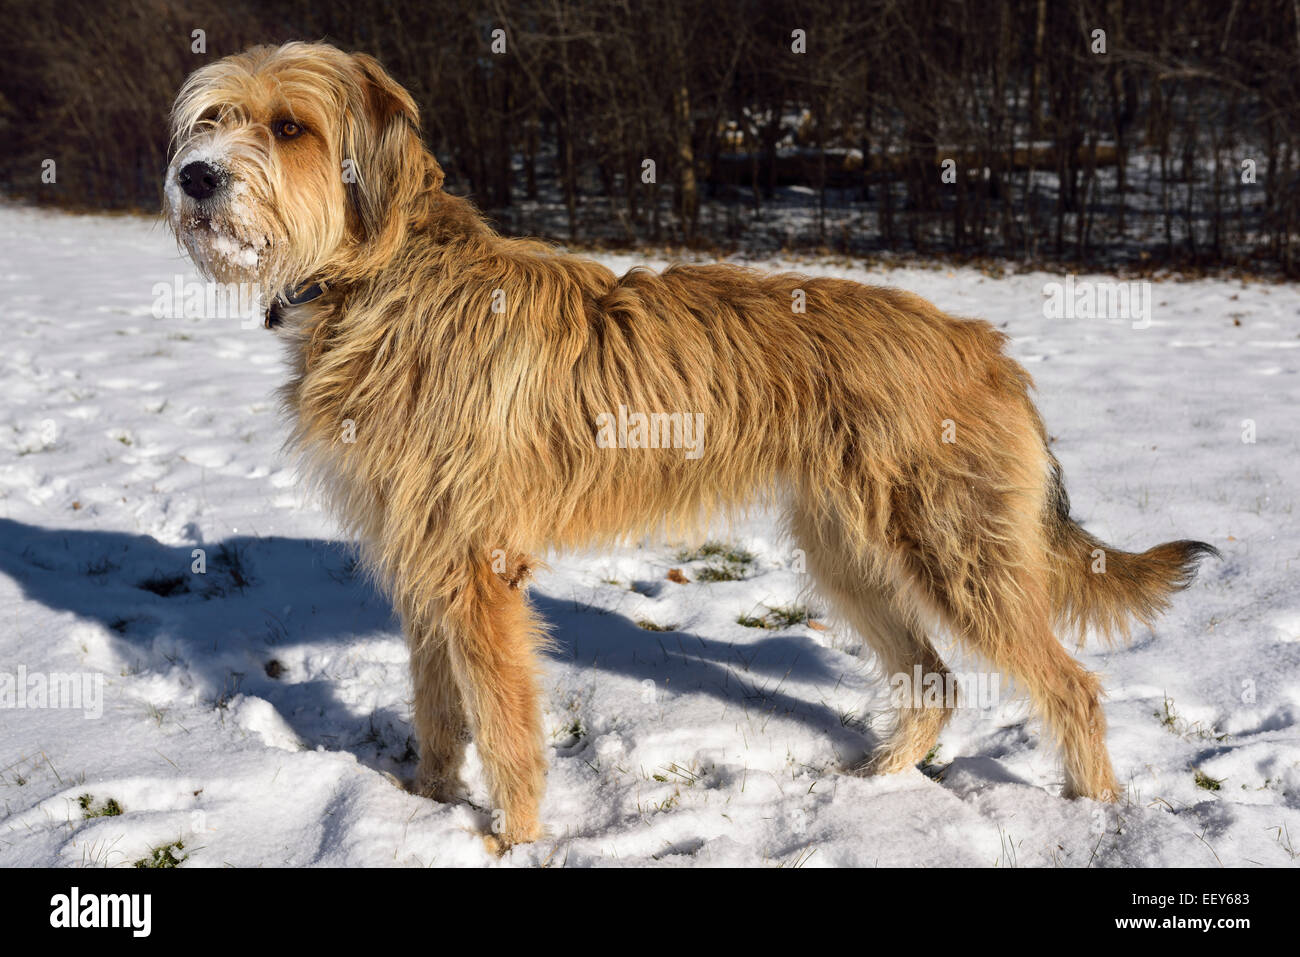 Mixed breed scruffy pet dog standing in a snowy Toronto park in winter Stock Photo